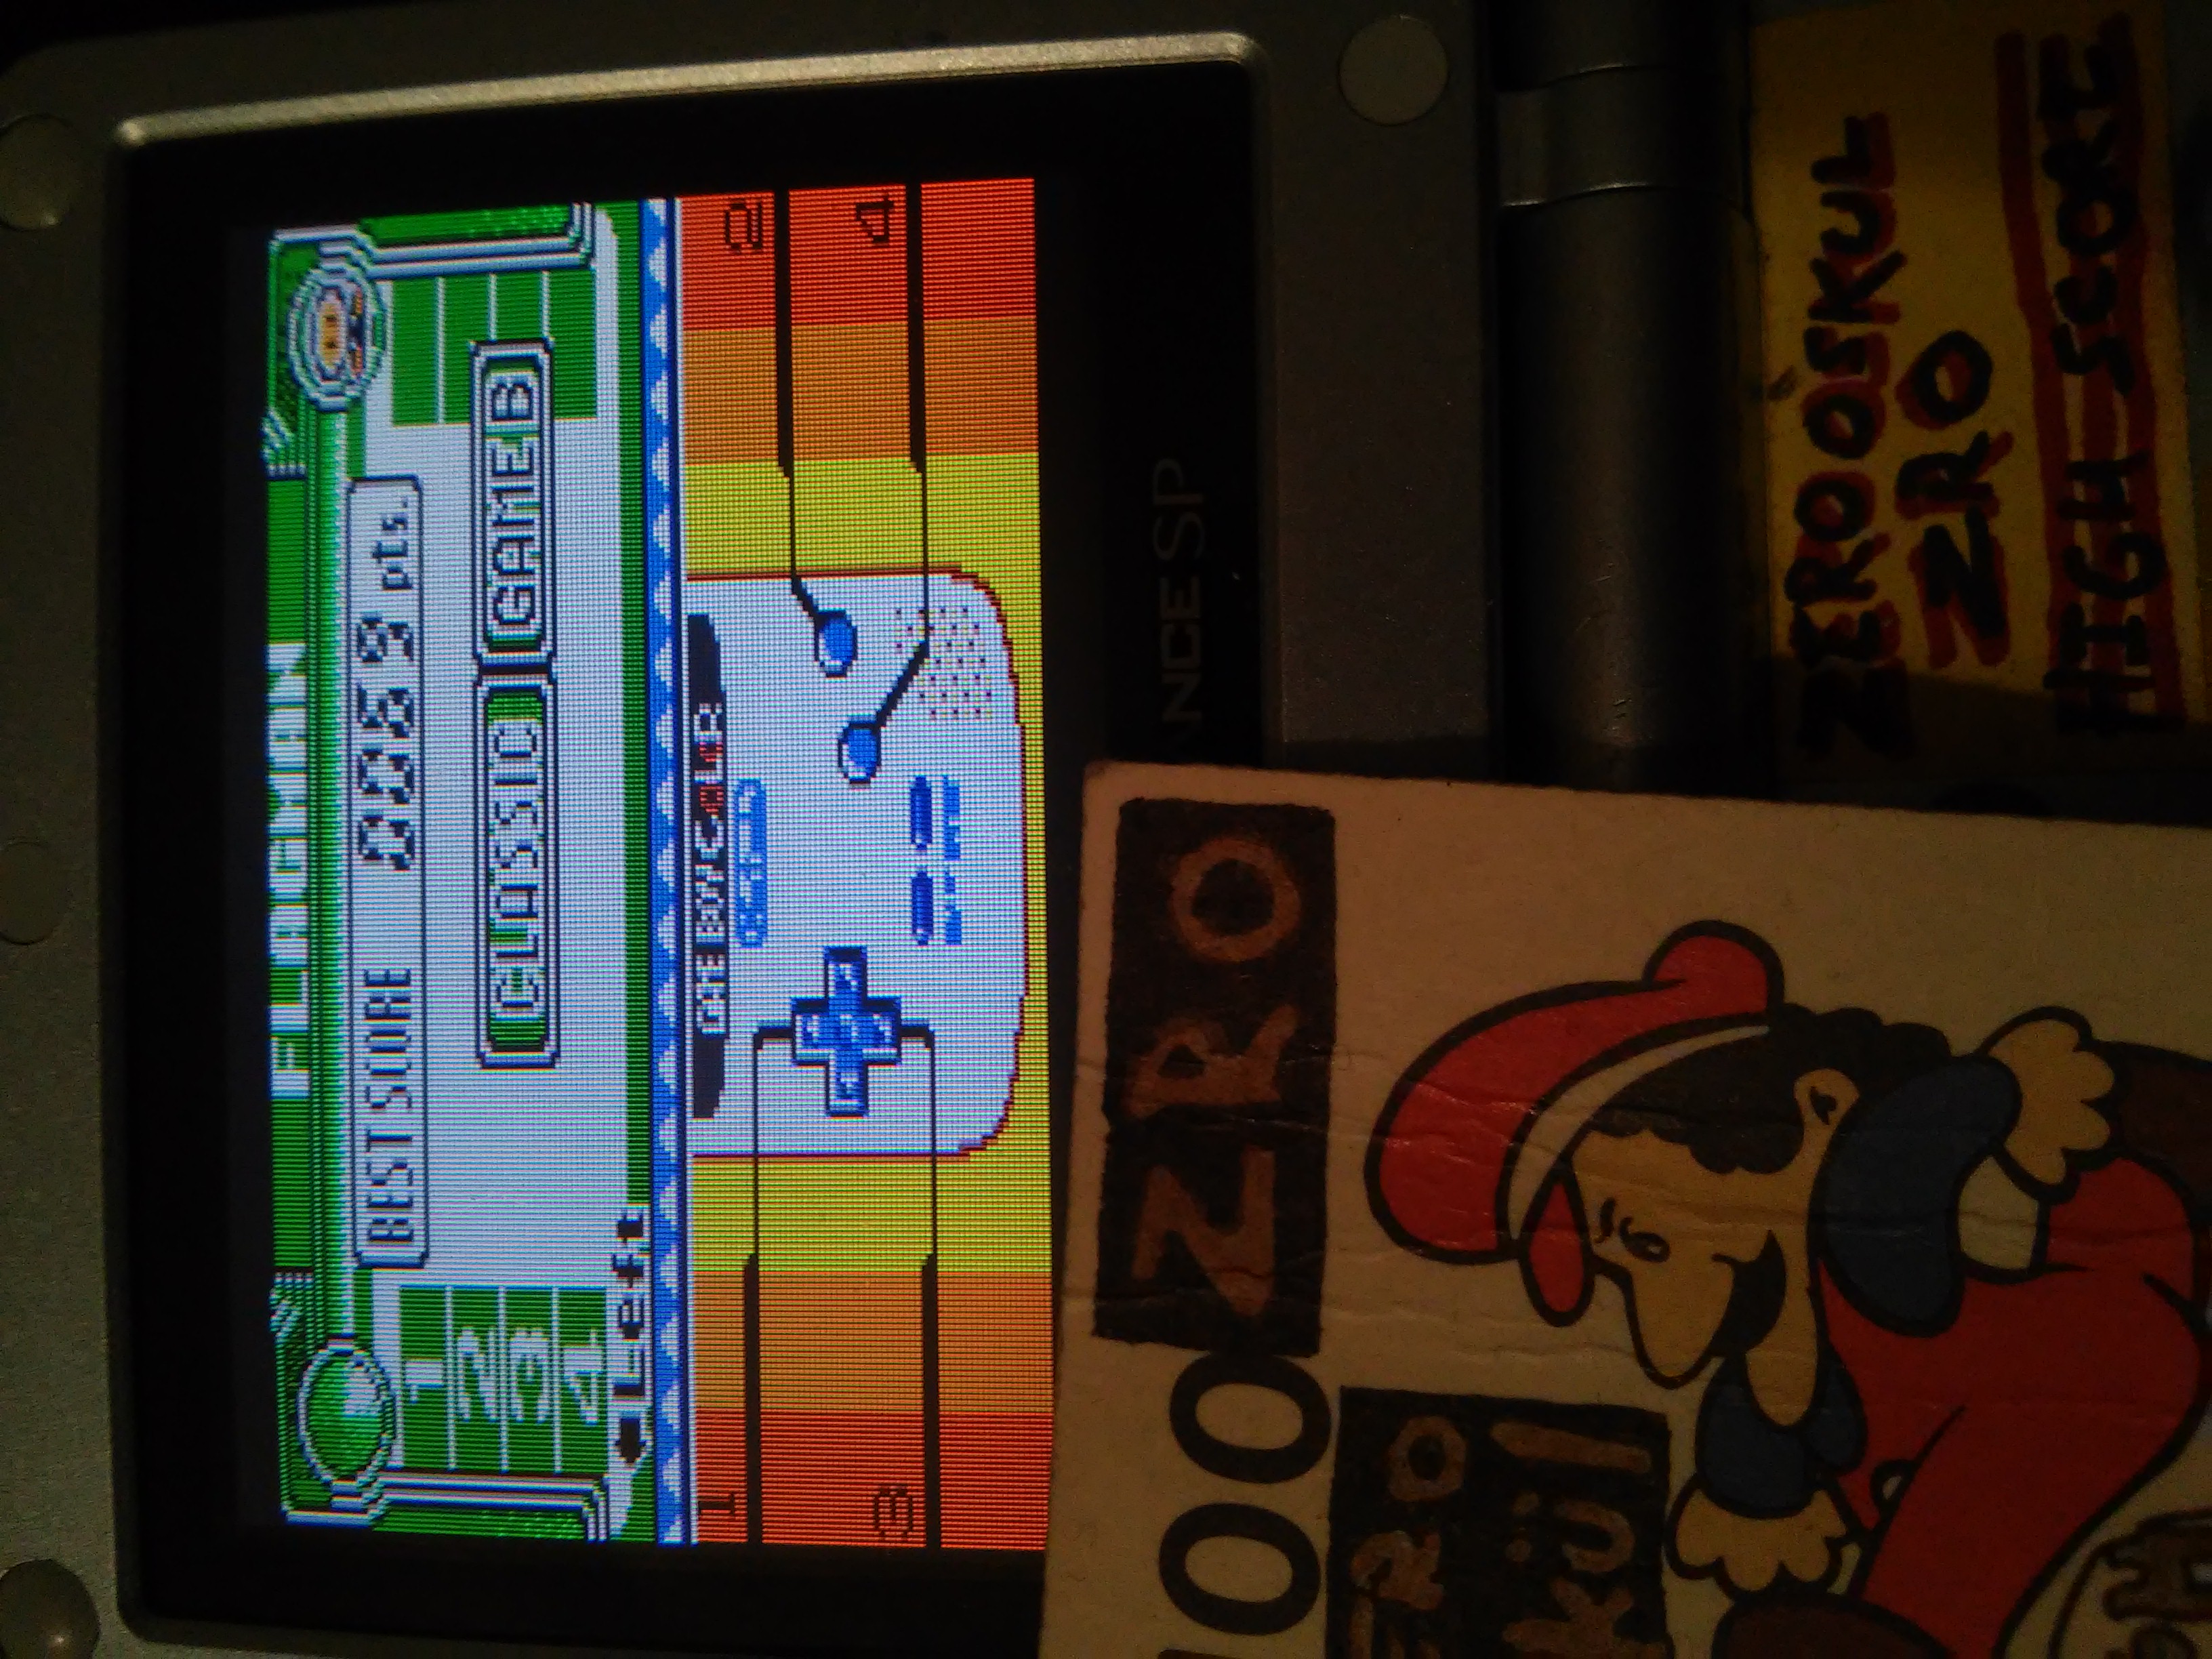 zerooskul: Game & Watch Gallery 3: Flagman [Classic: Game B] (Game Boy Color) 69 points on 2019-02-03 16:04:47